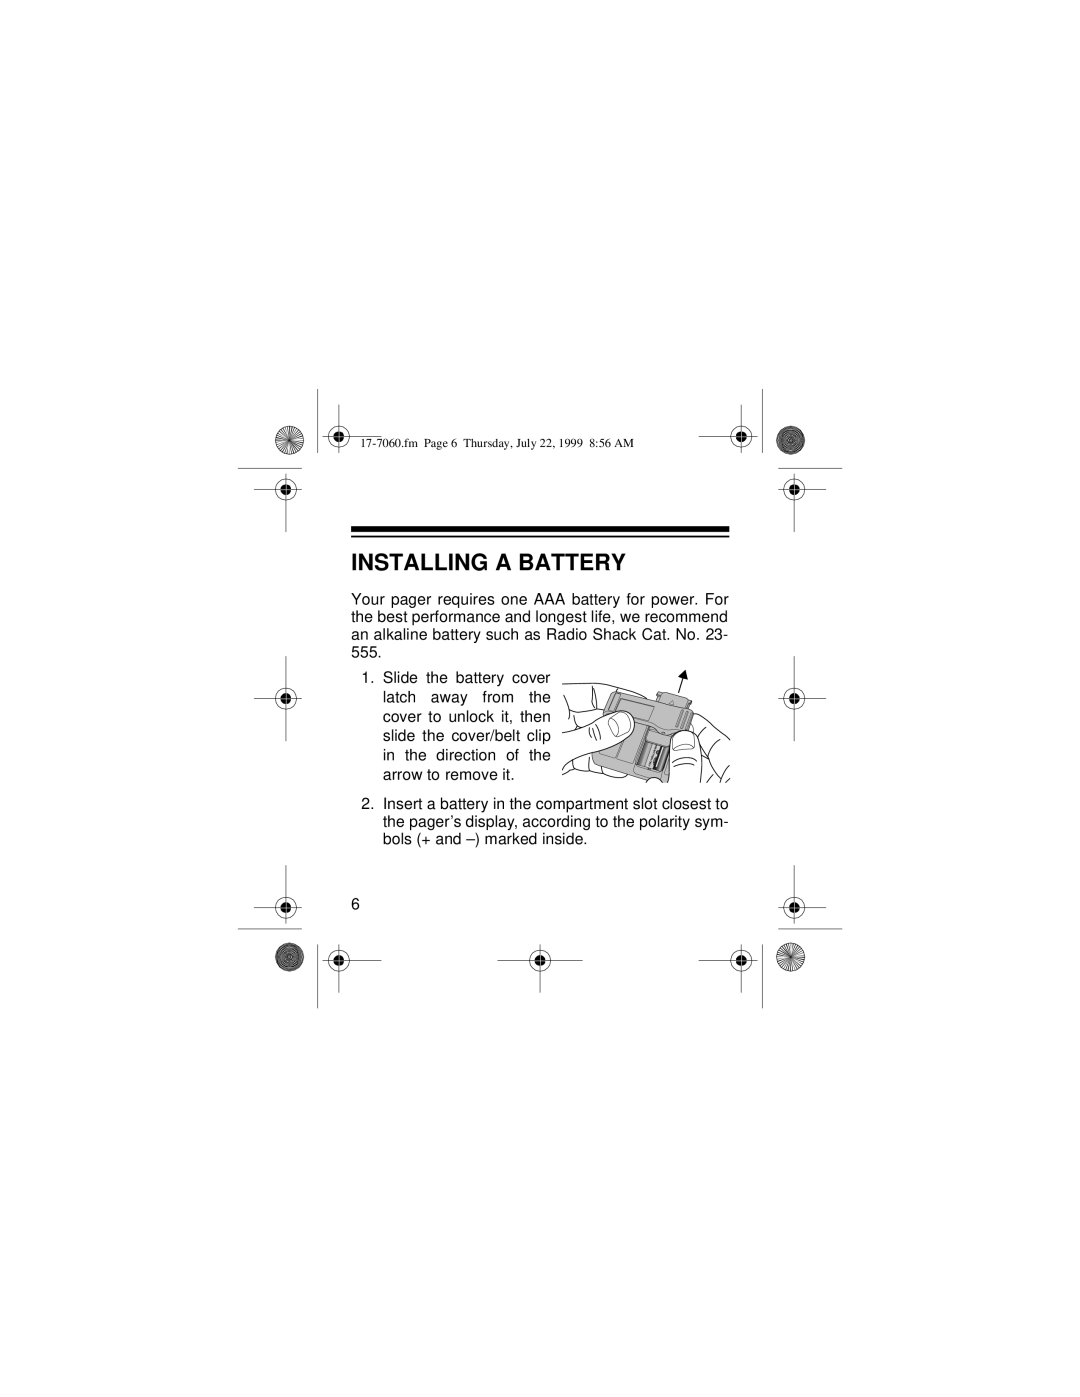 Radio Shack 17-7040, 17-7060 owner manual Installing A Battery, fm Page 6 Thursday, July 22, 1999 856 AM 